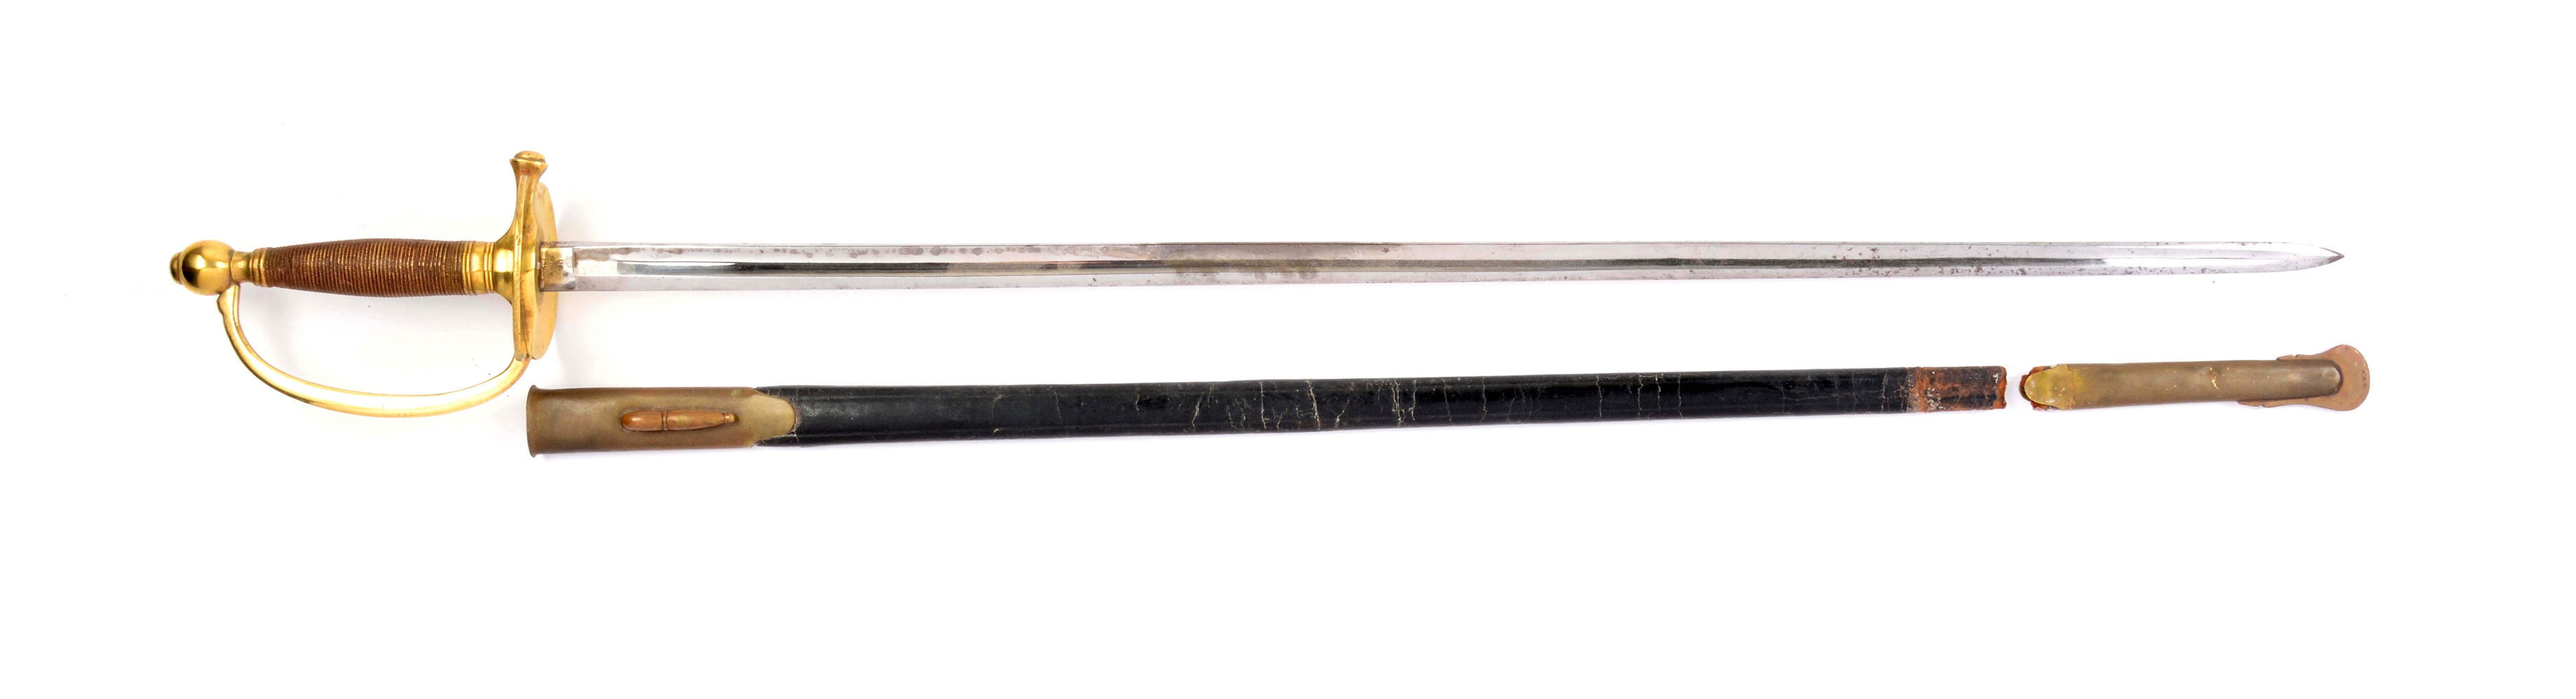 U.S. MODEL 1840 NON-COMMISSIONED OFFICERS SWORD.